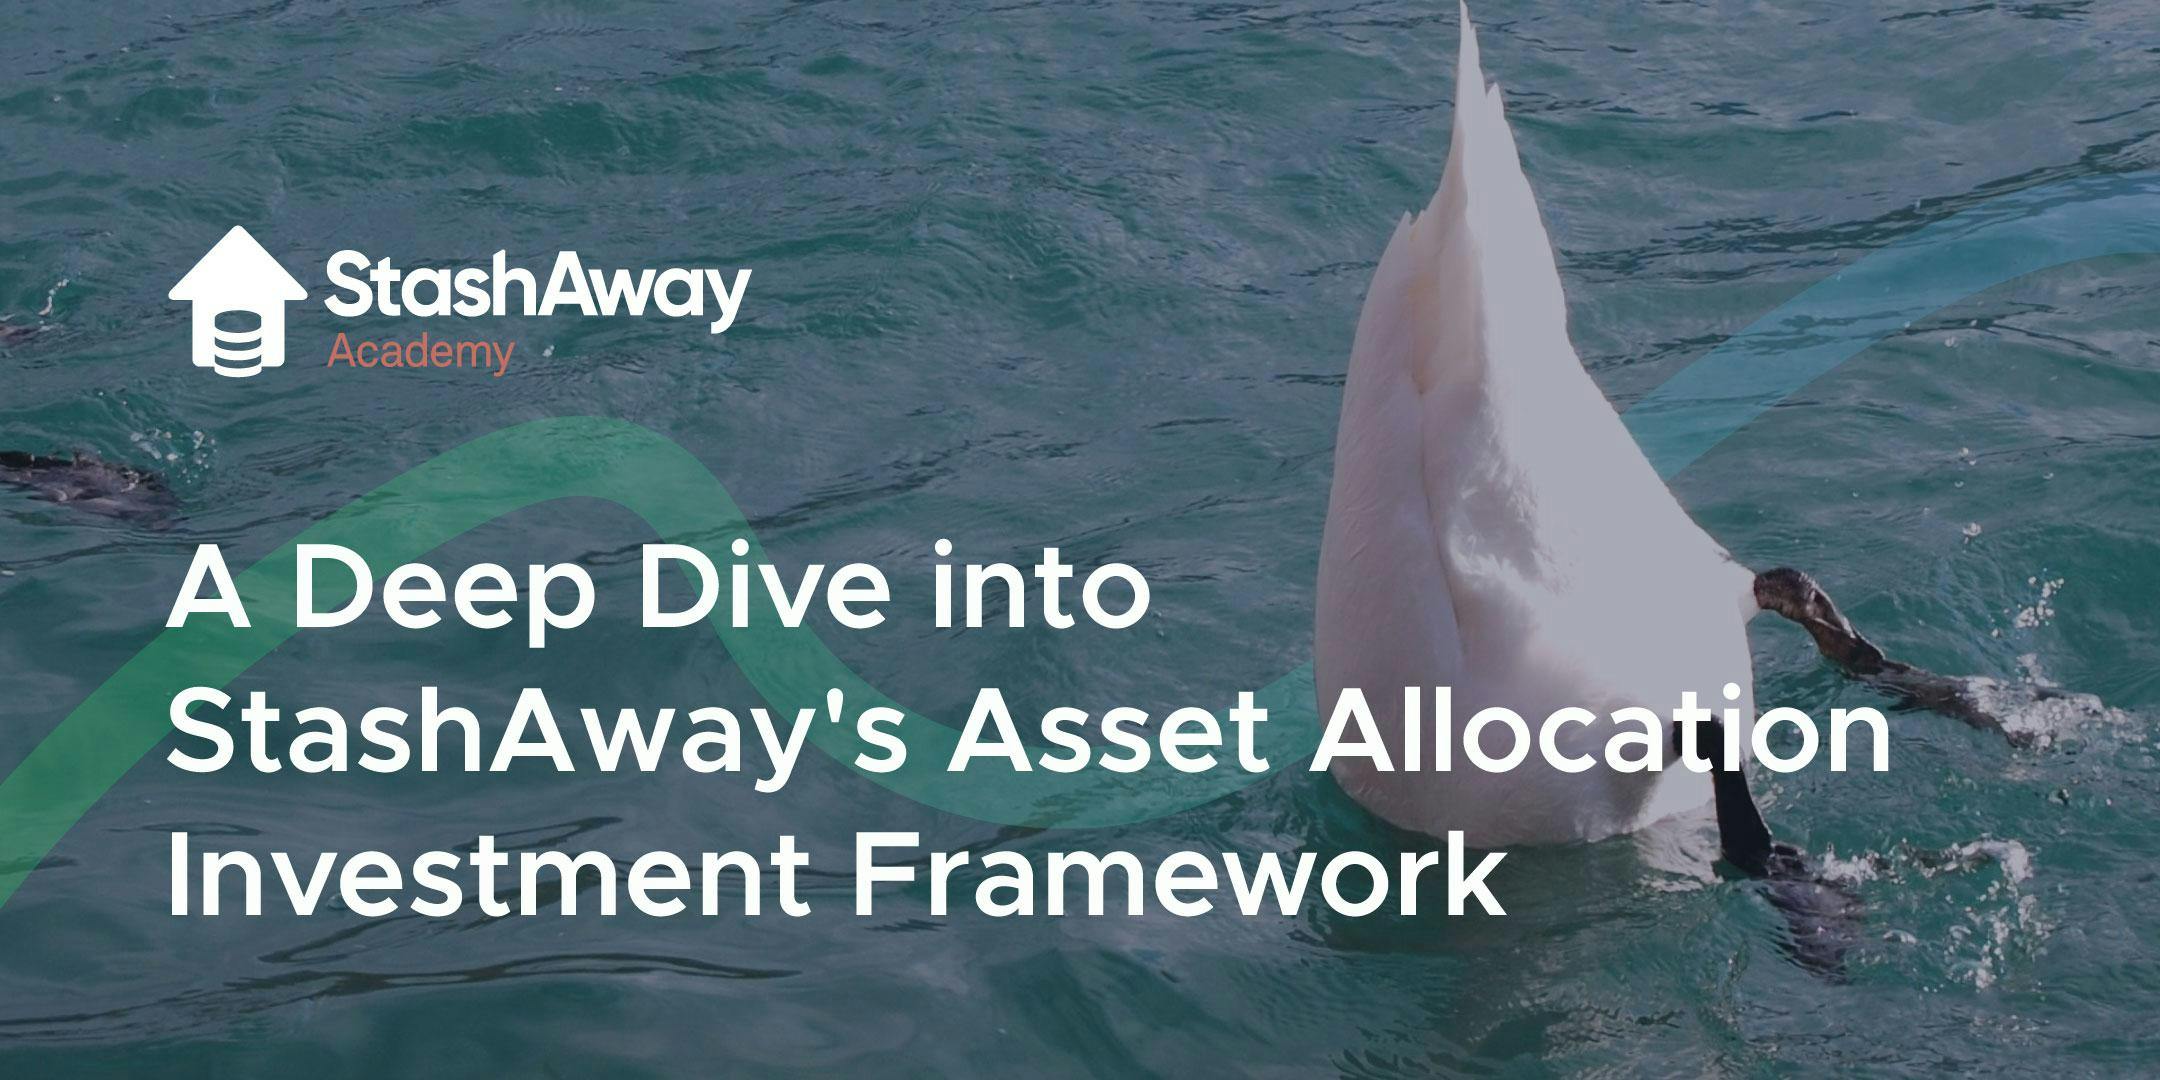 A Deep Dive into StashAway’s Advanced Investment Framework